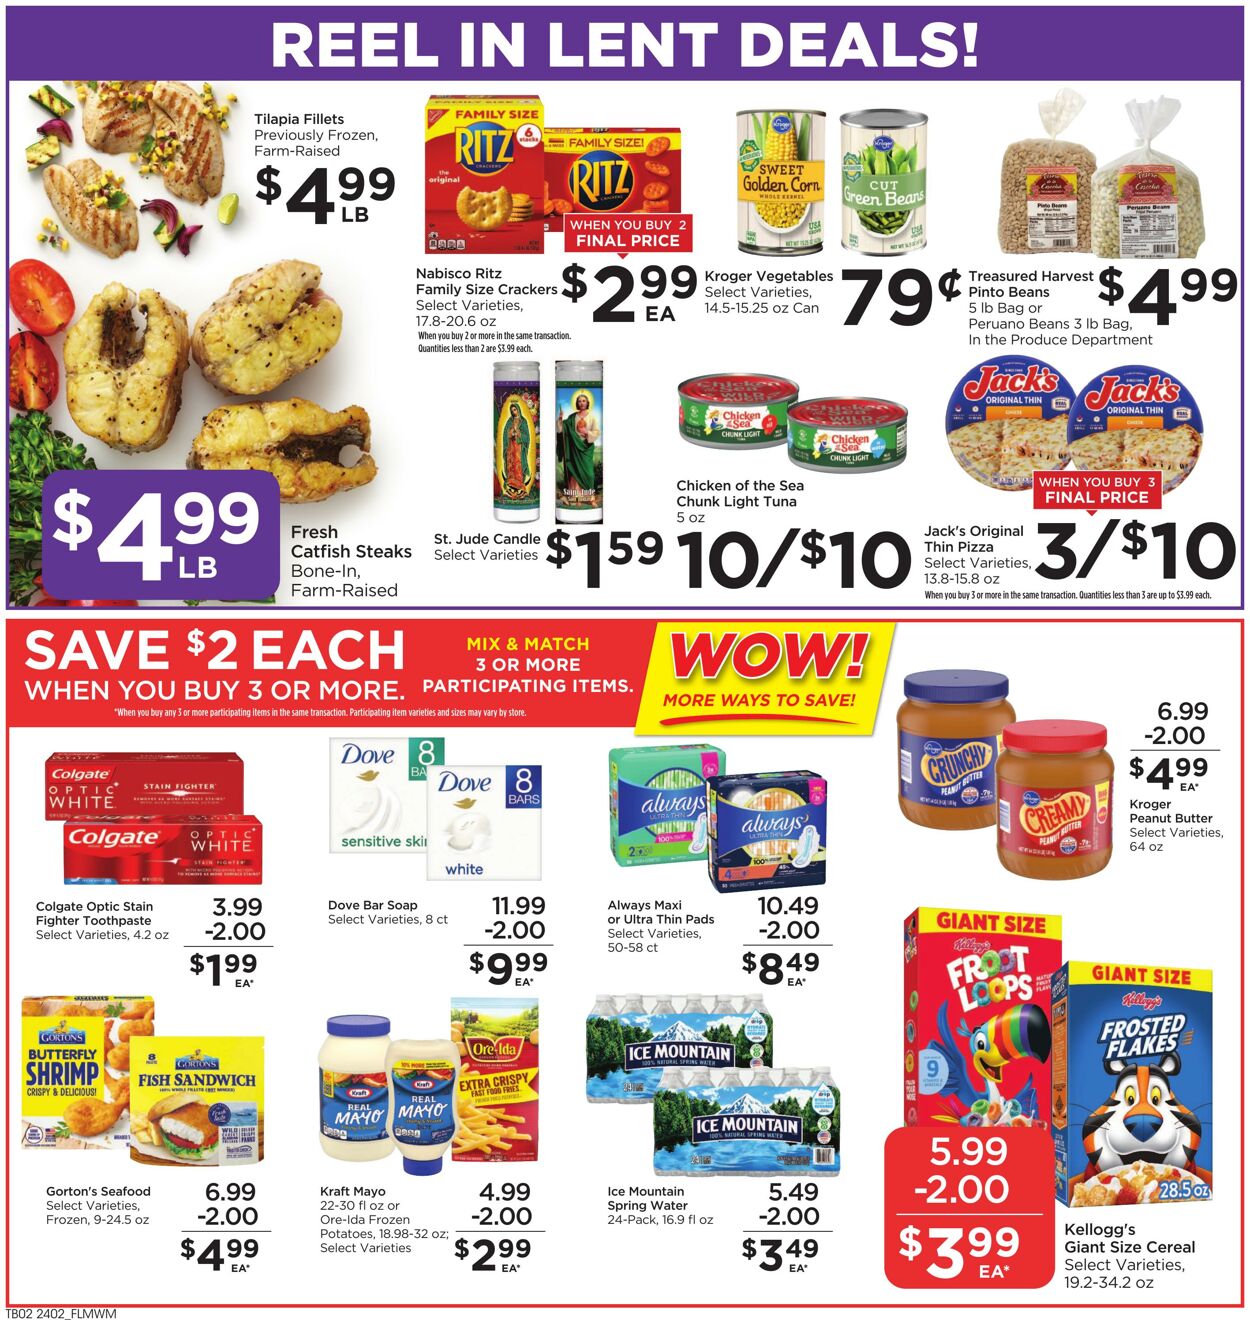 Catalogue Food 4 Less from 02/14/2024